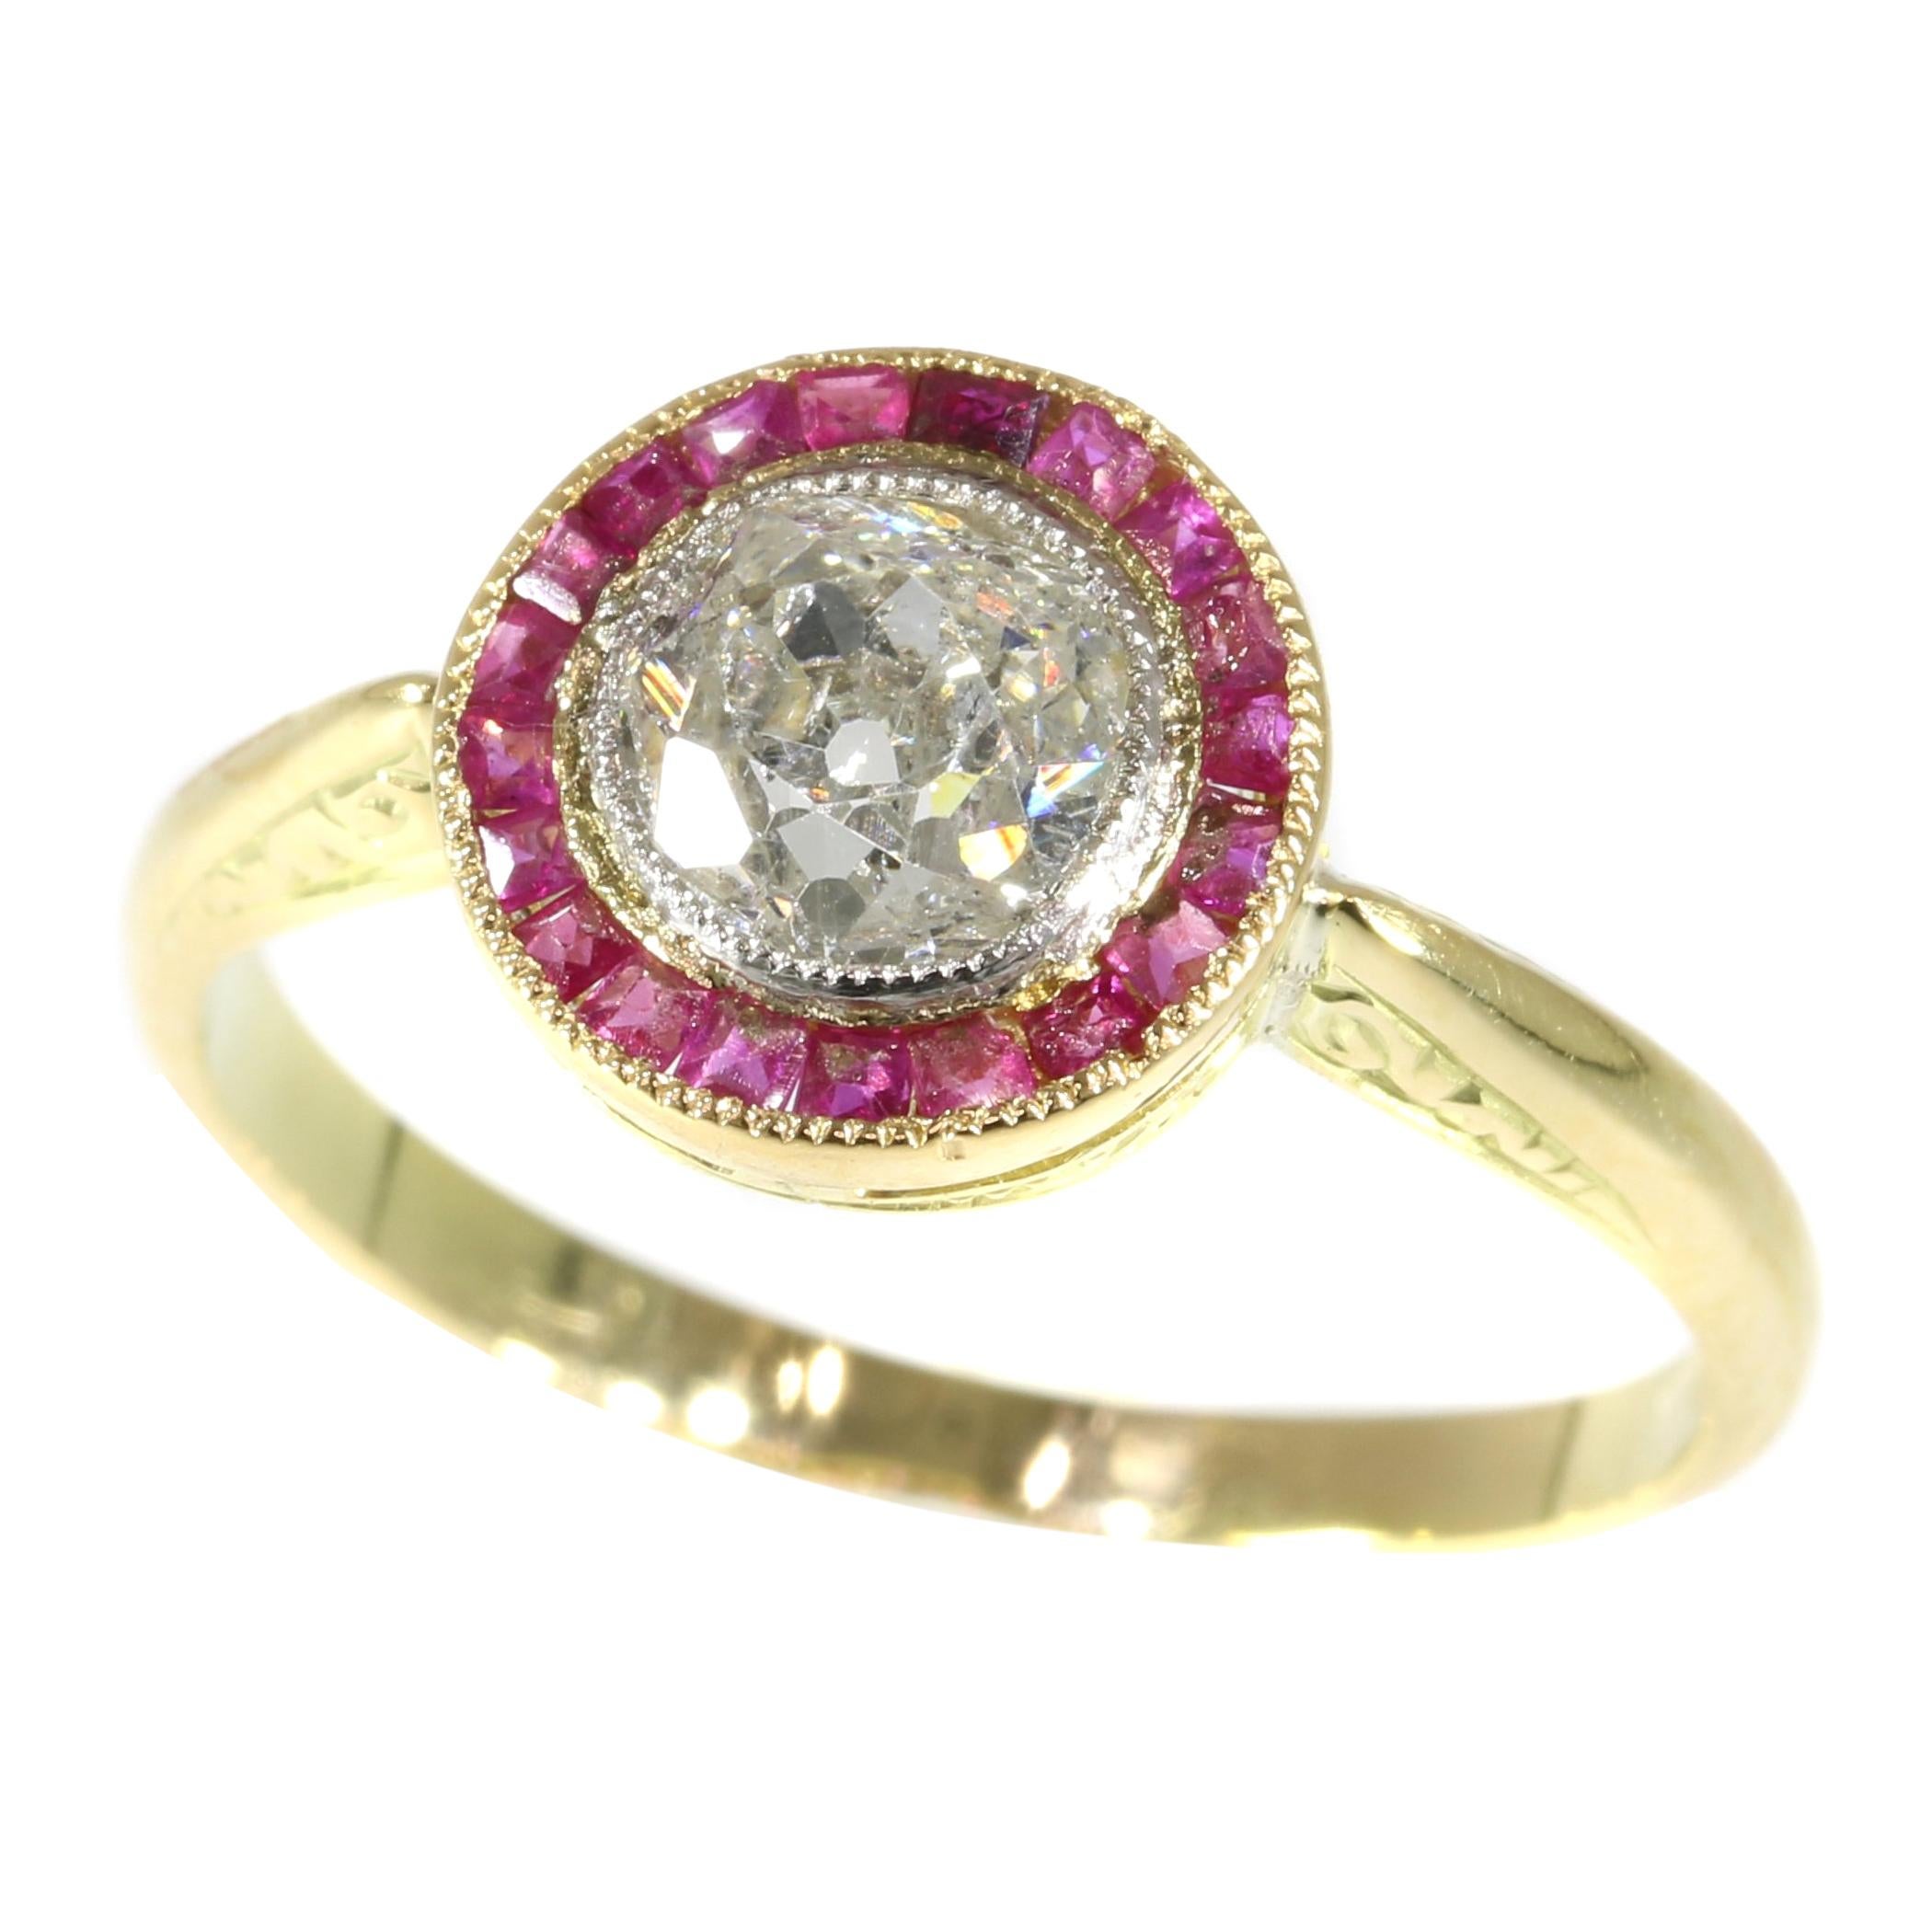 Authentic Art Deco Vintage Diamond and Ruby Engagement Ring